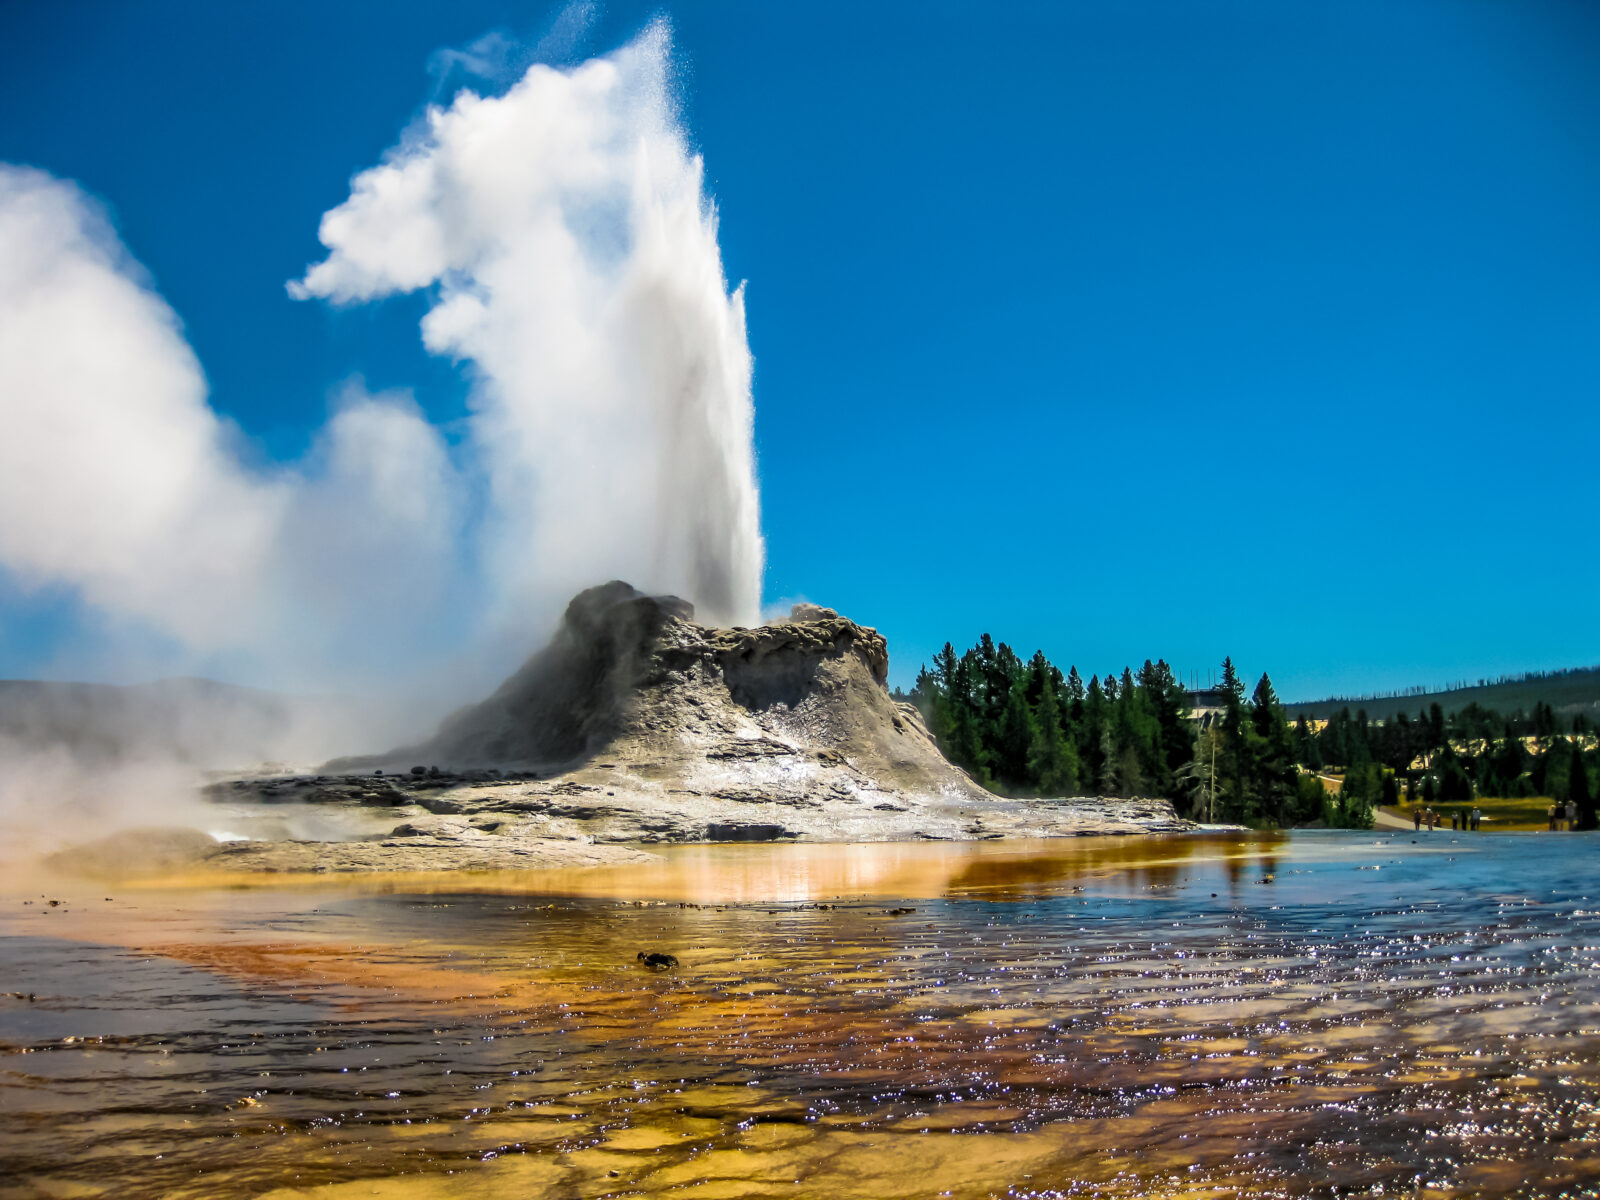 Castle Geyser erupts with hot water and steam with pools of thermophilic bacteria and is a cone geyser in the Upper Geyser Basin of Yellowstone National Park, Wyoming, United States.